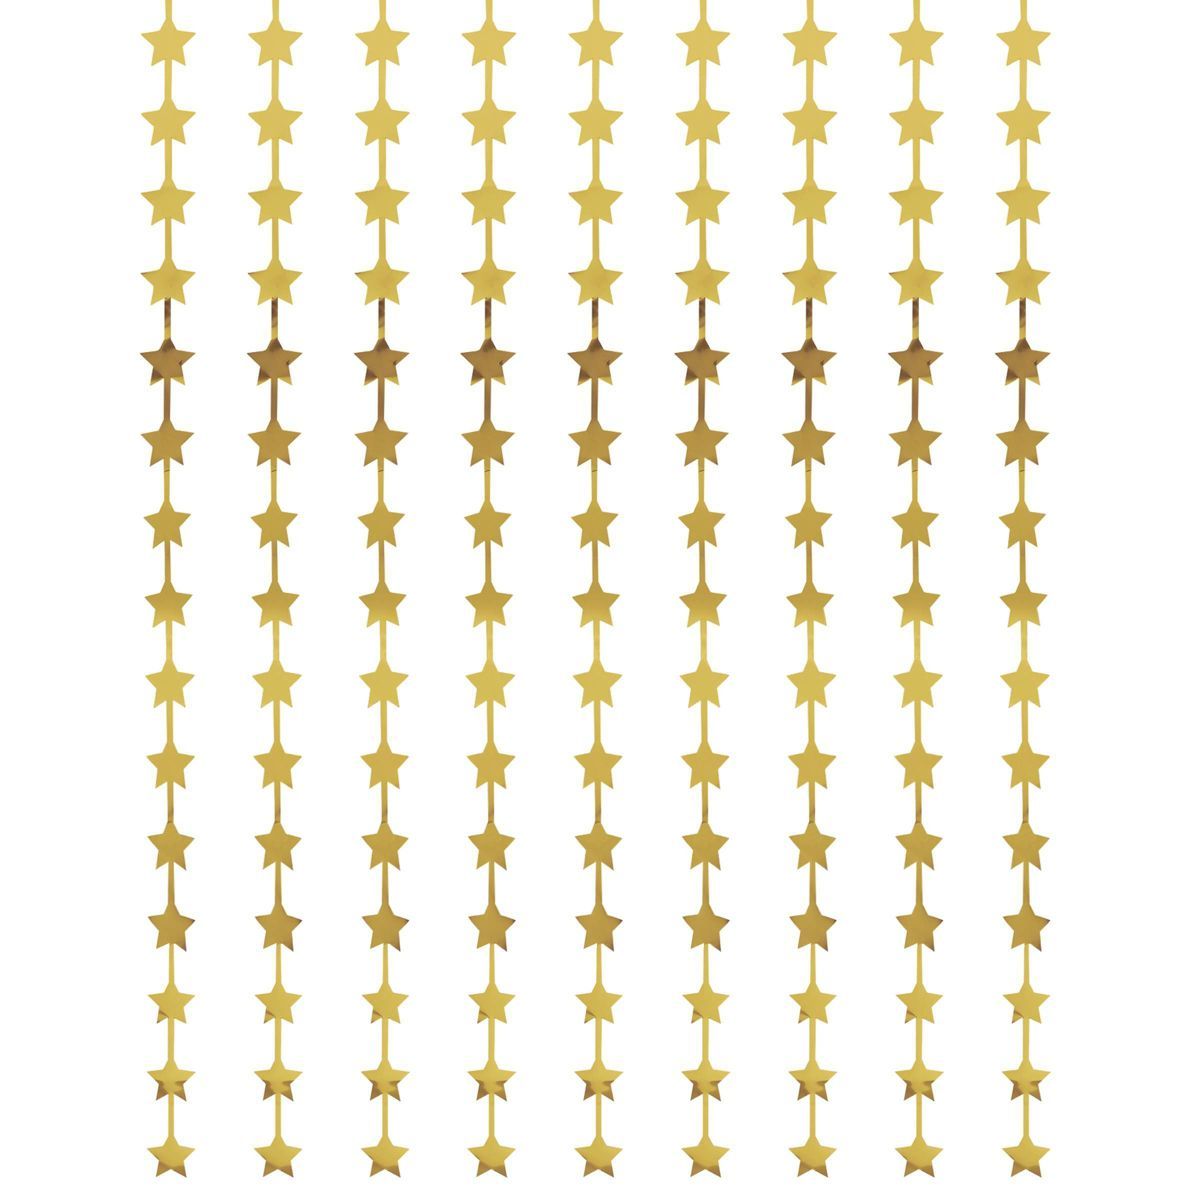 9ct Star Backdrop Party Decoration Gold - Spritz™ | Target